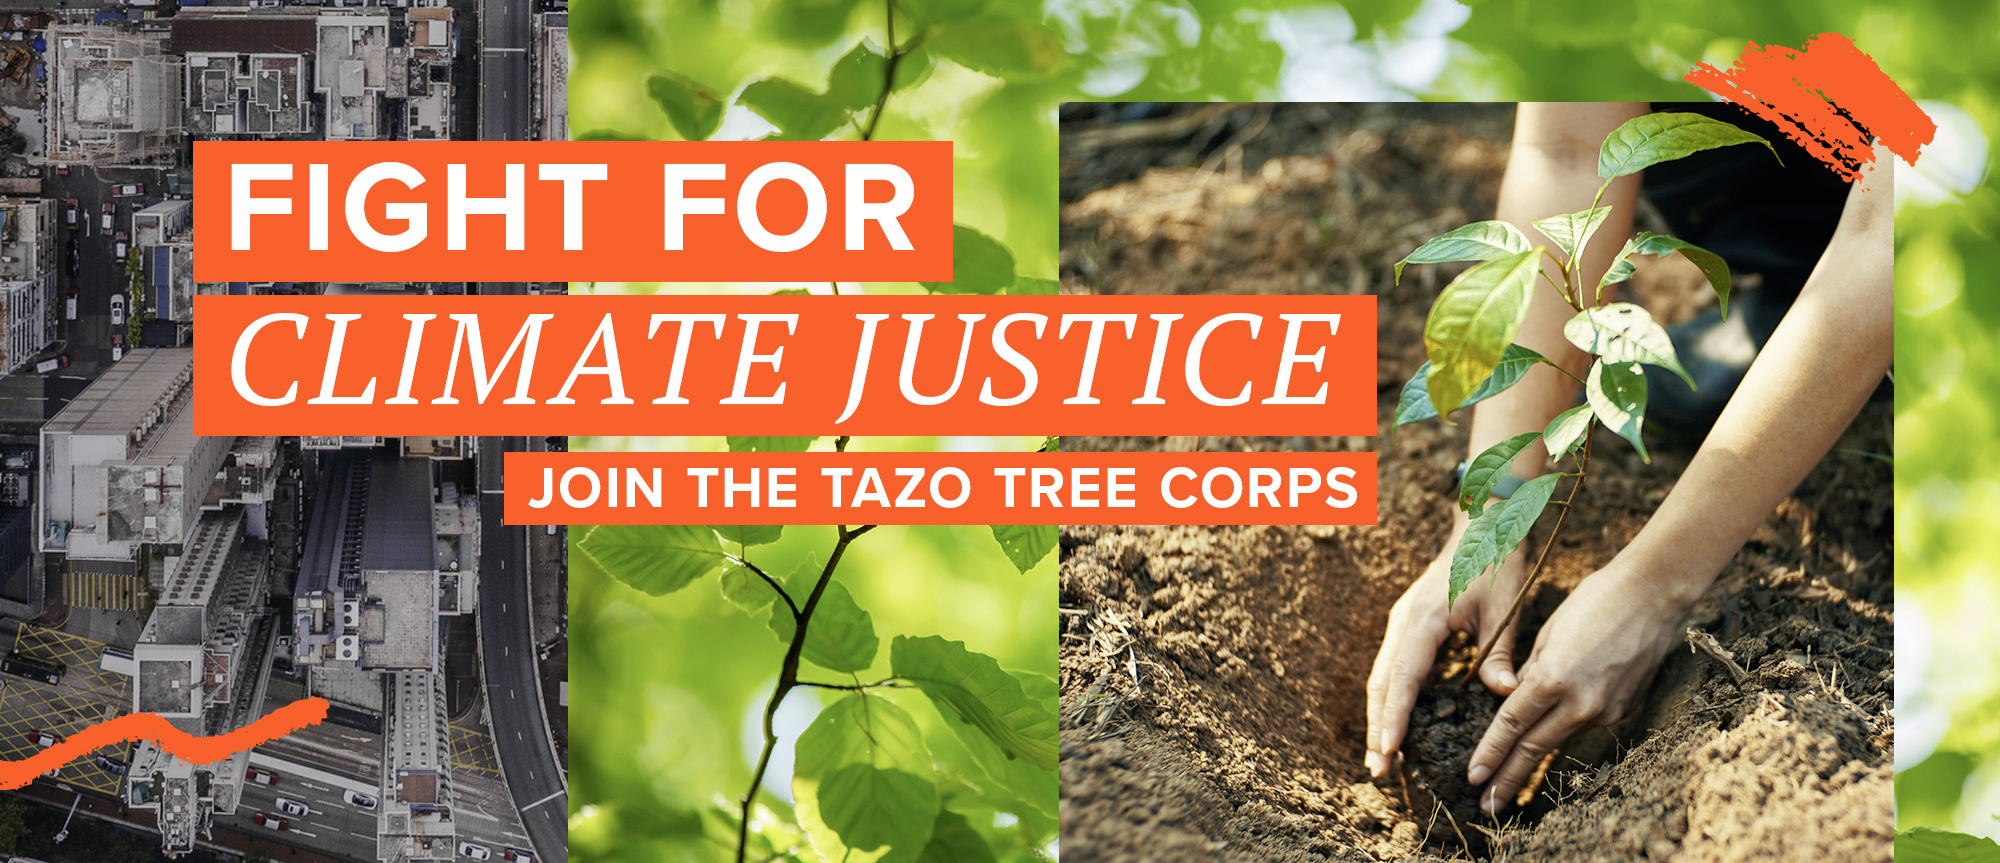 Fight for climate justice - Join the TAZO Tree Corps image